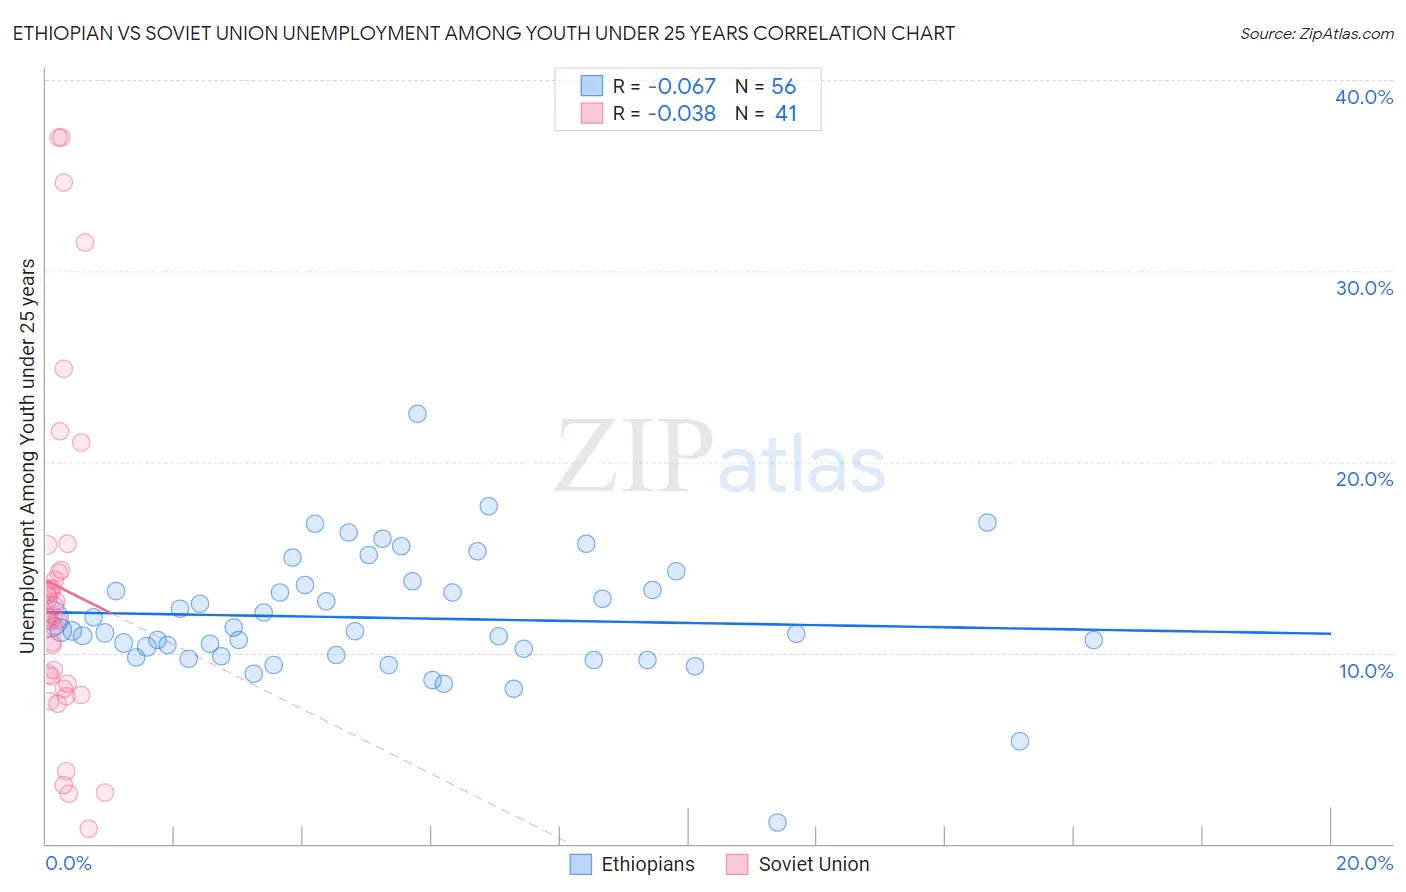 Ethiopian vs Soviet Union Unemployment Among Youth under 25 years